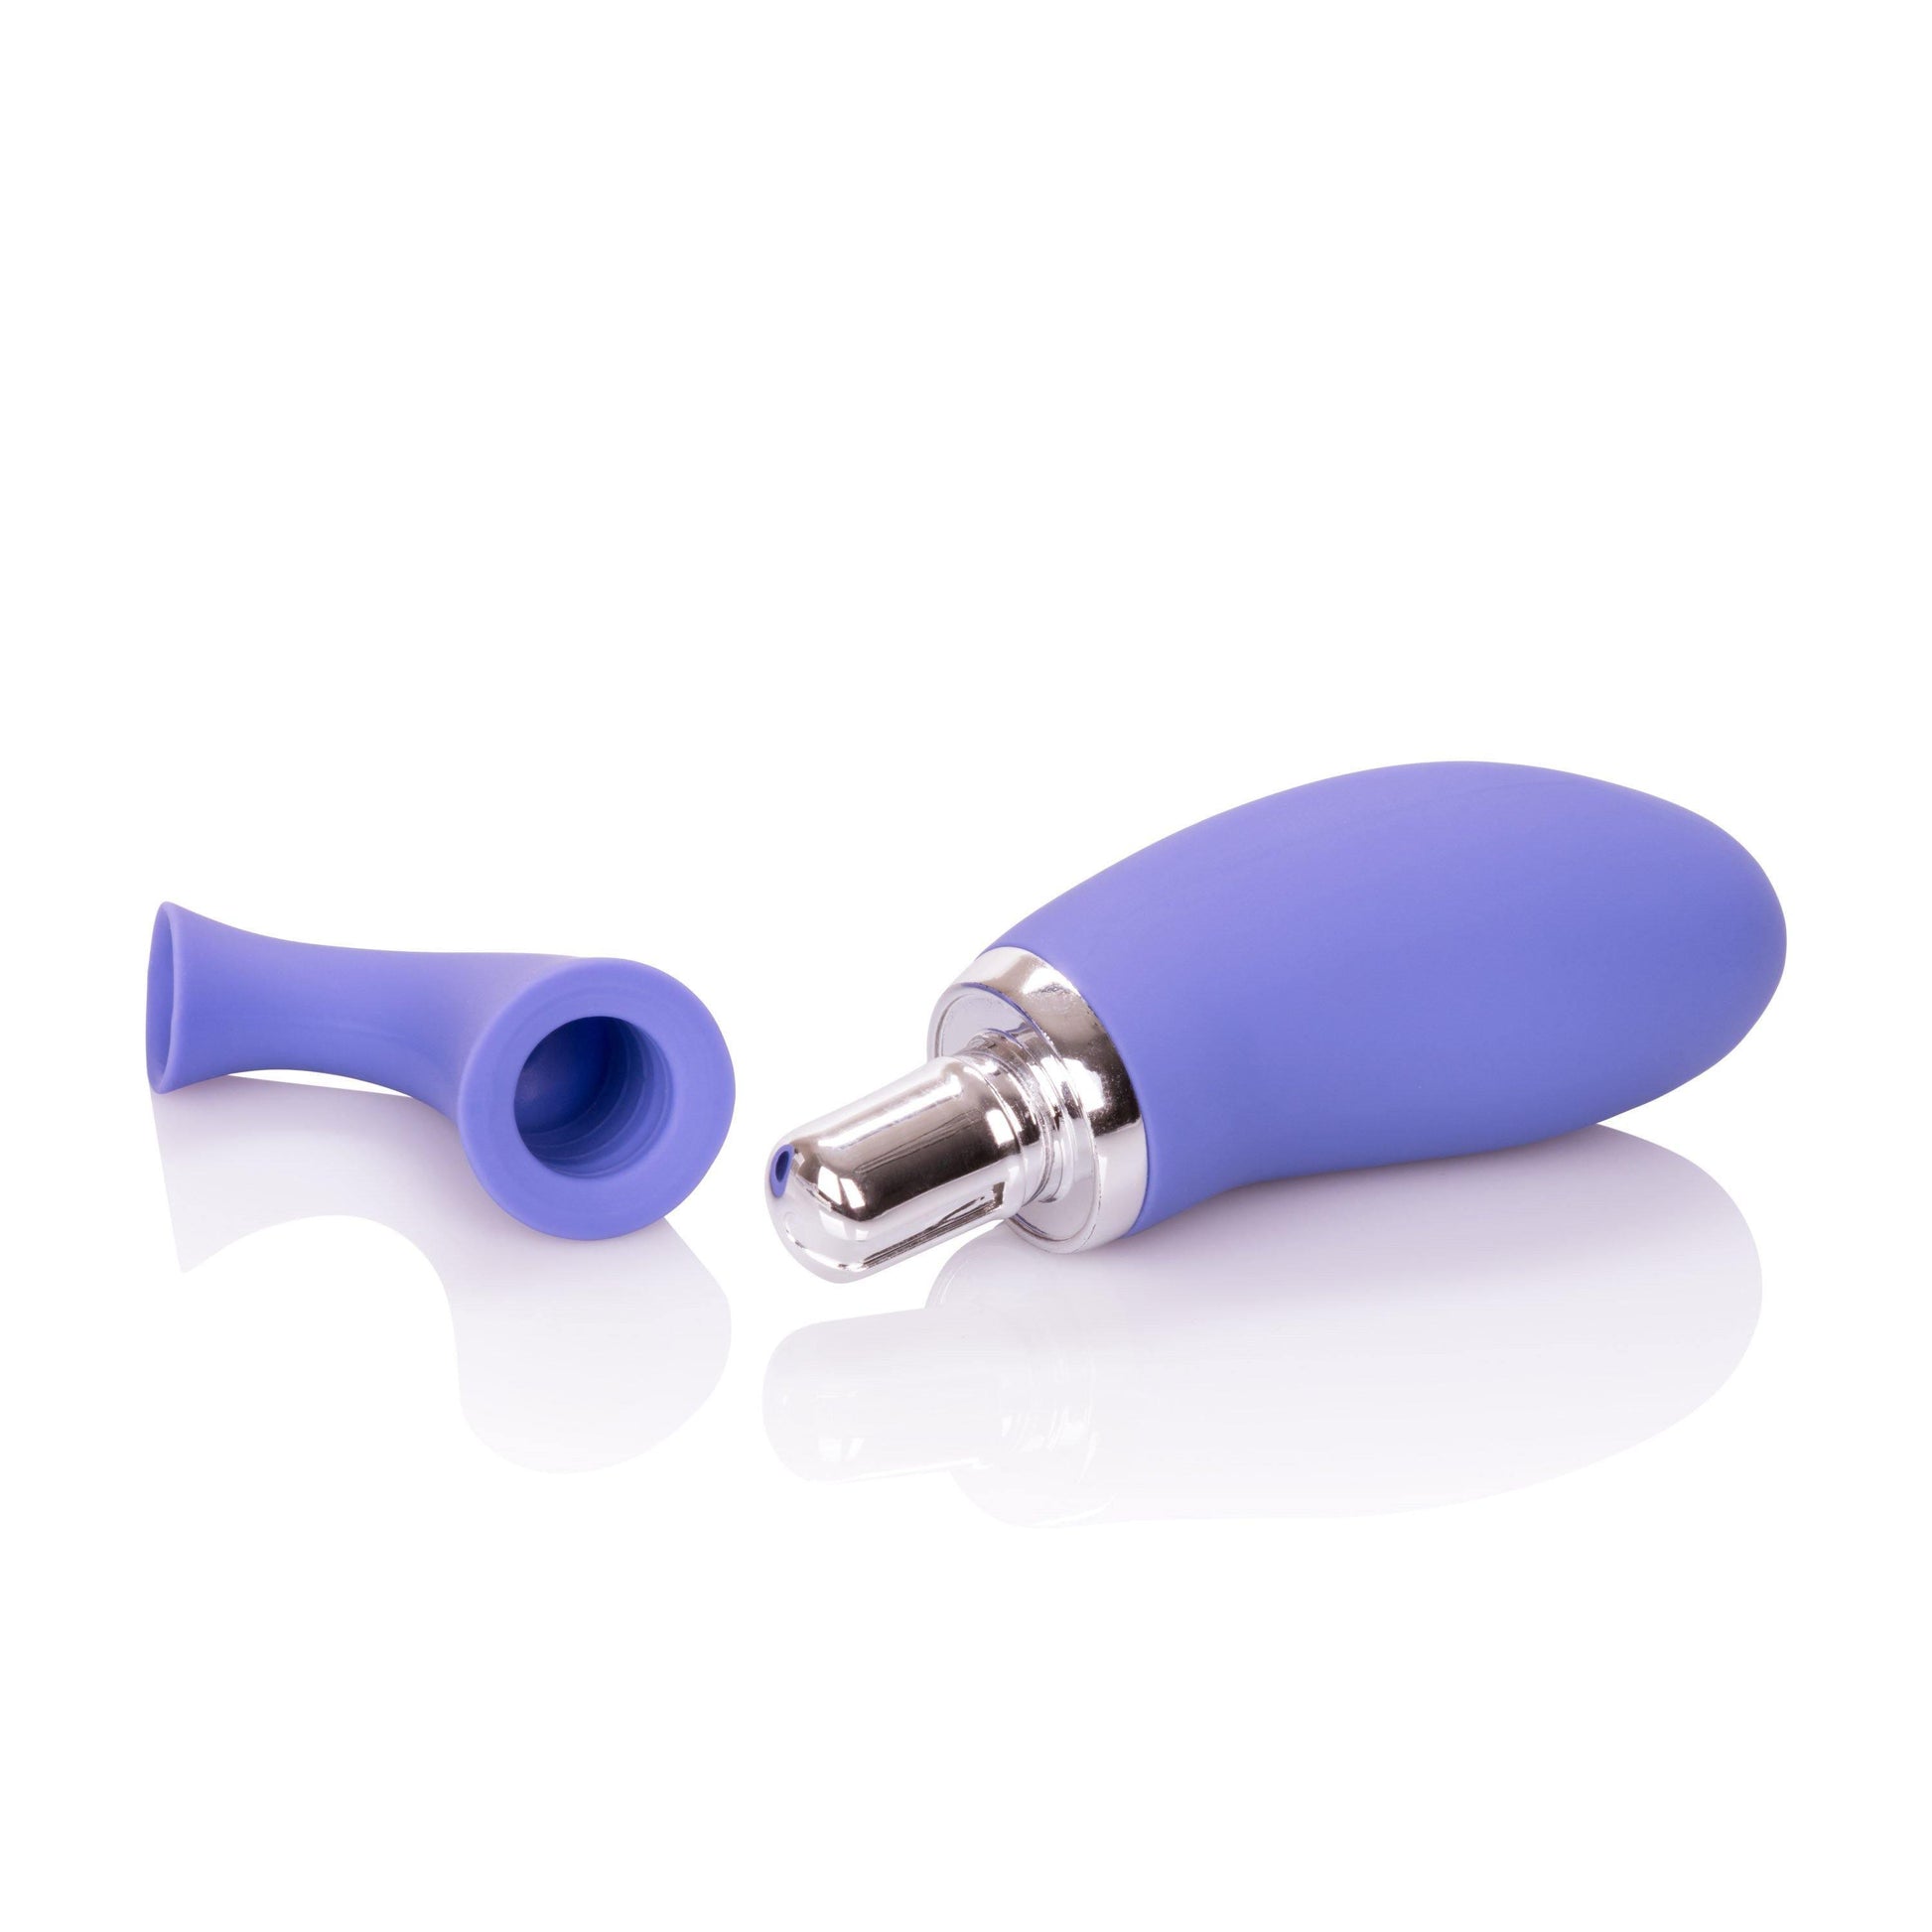 Rechargeable Clitoral Pump - My Sex Toy Hub